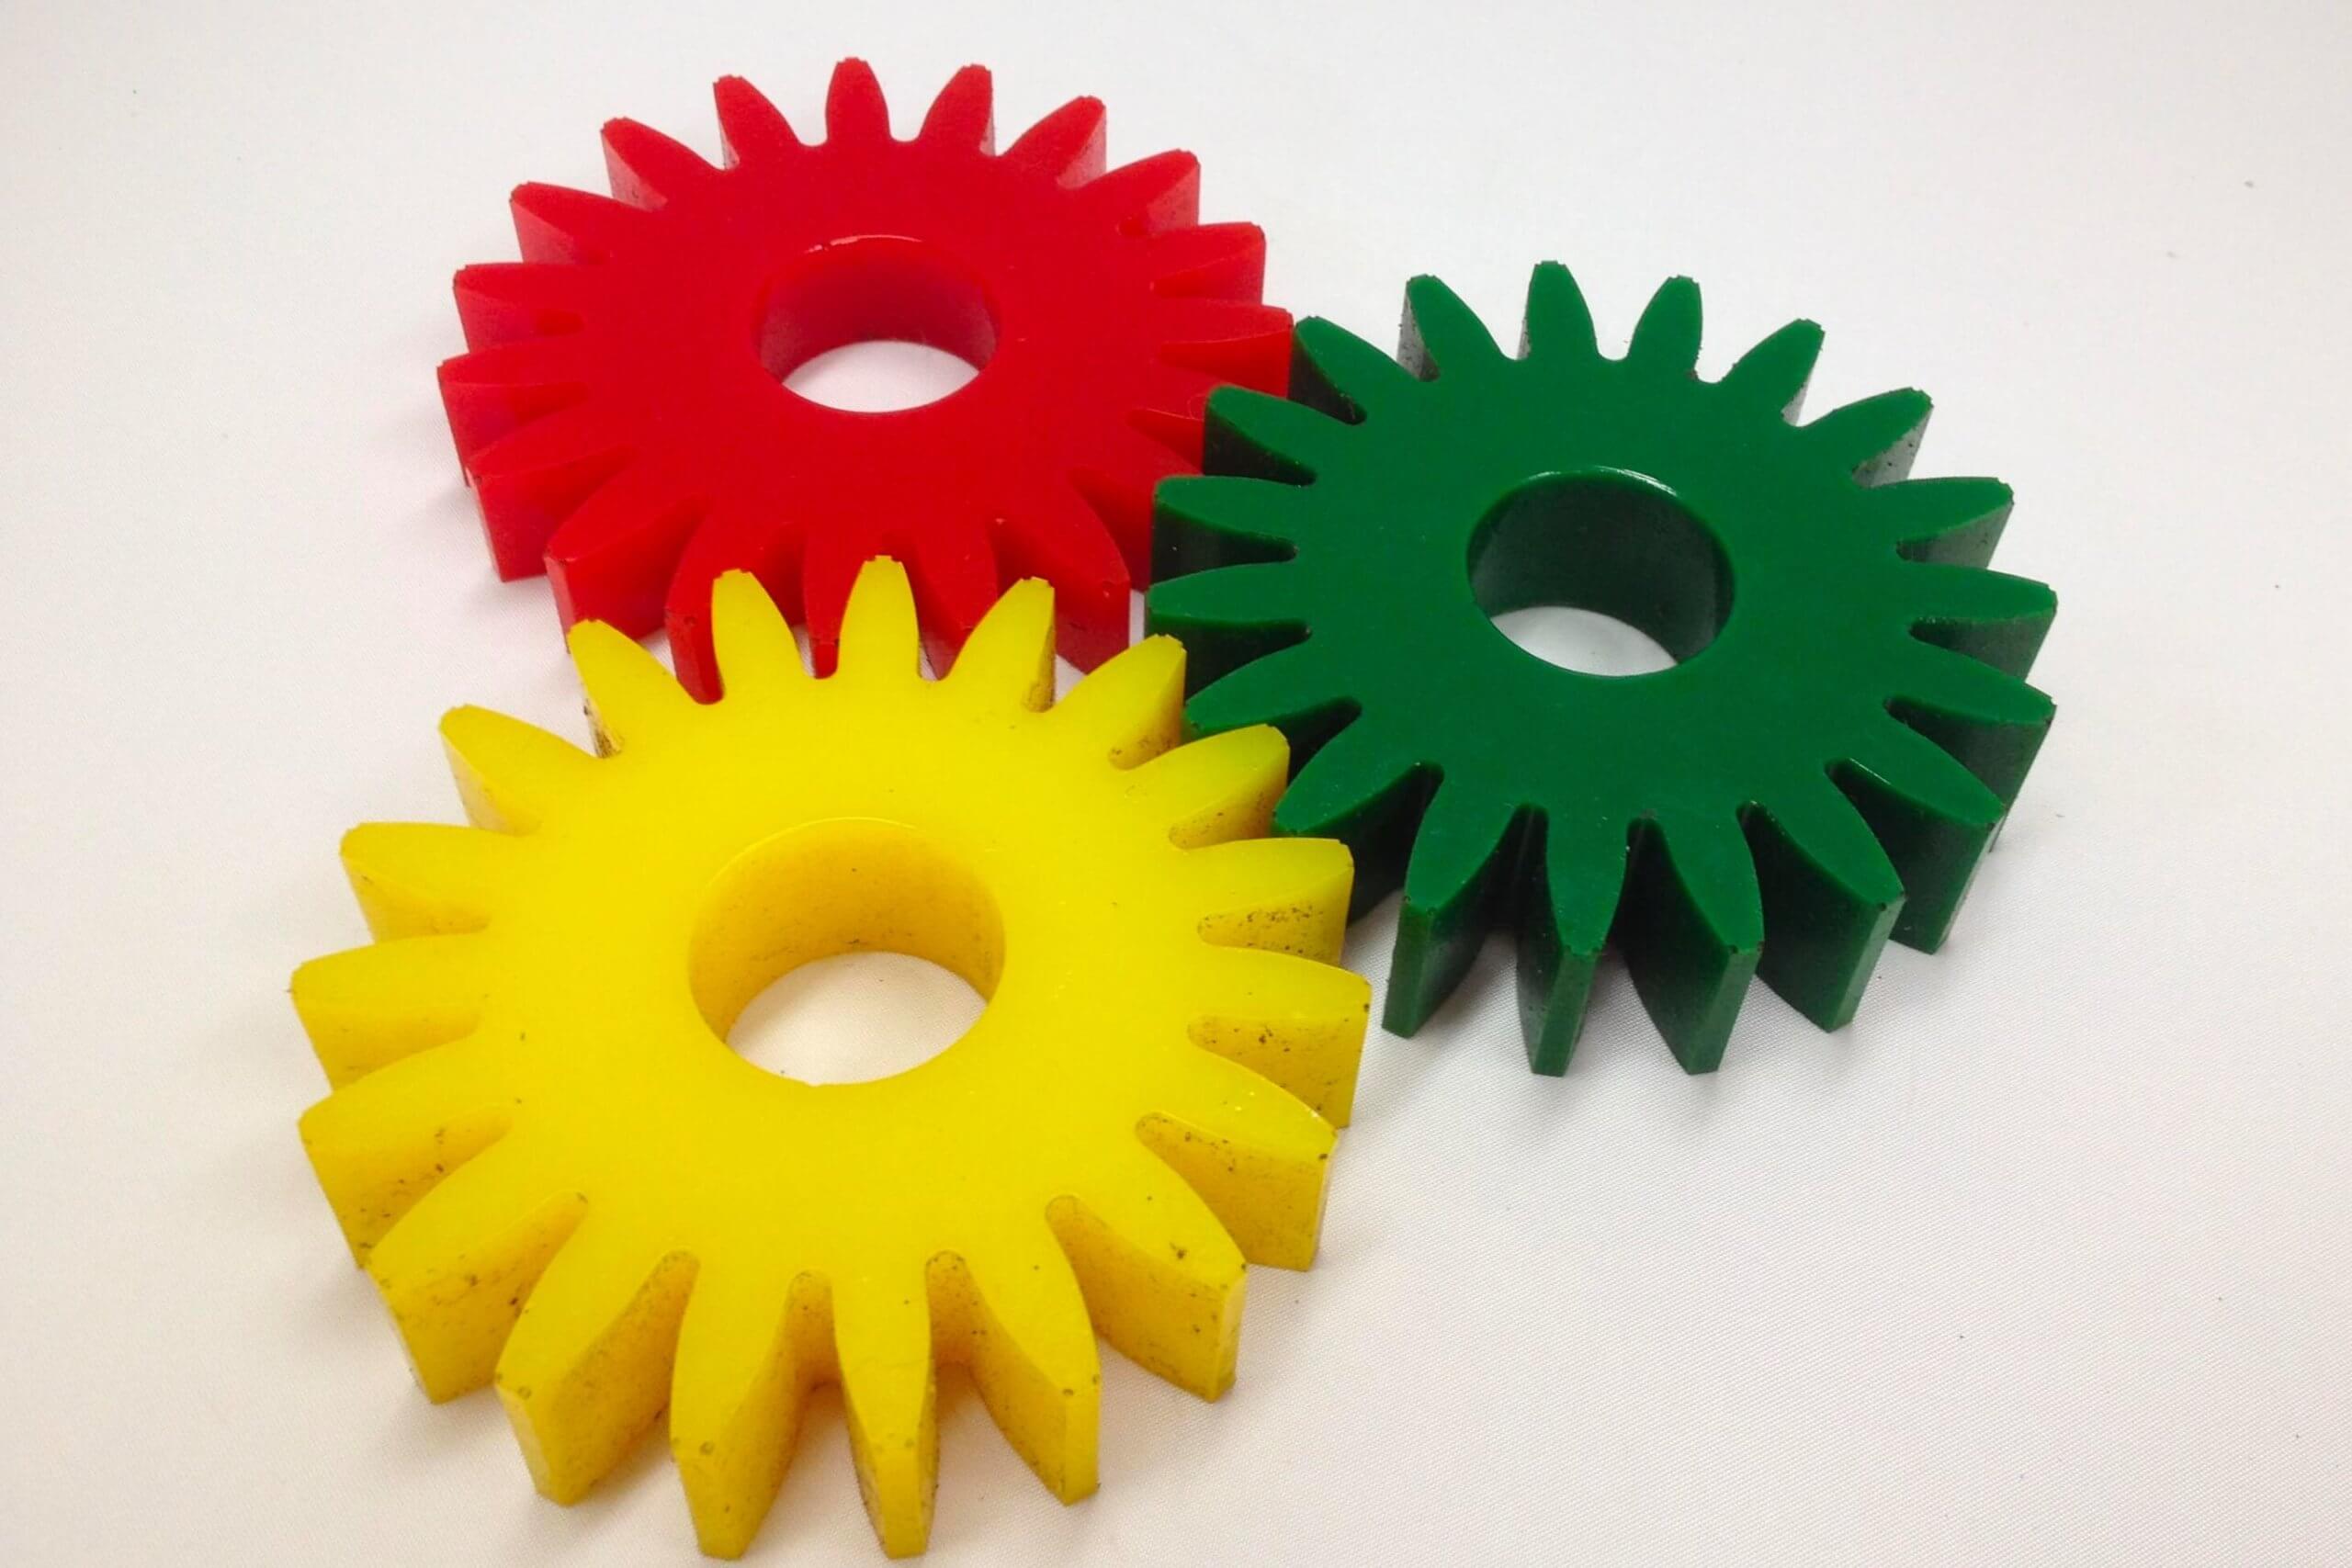 polyurethane can be used to make many types of wheels